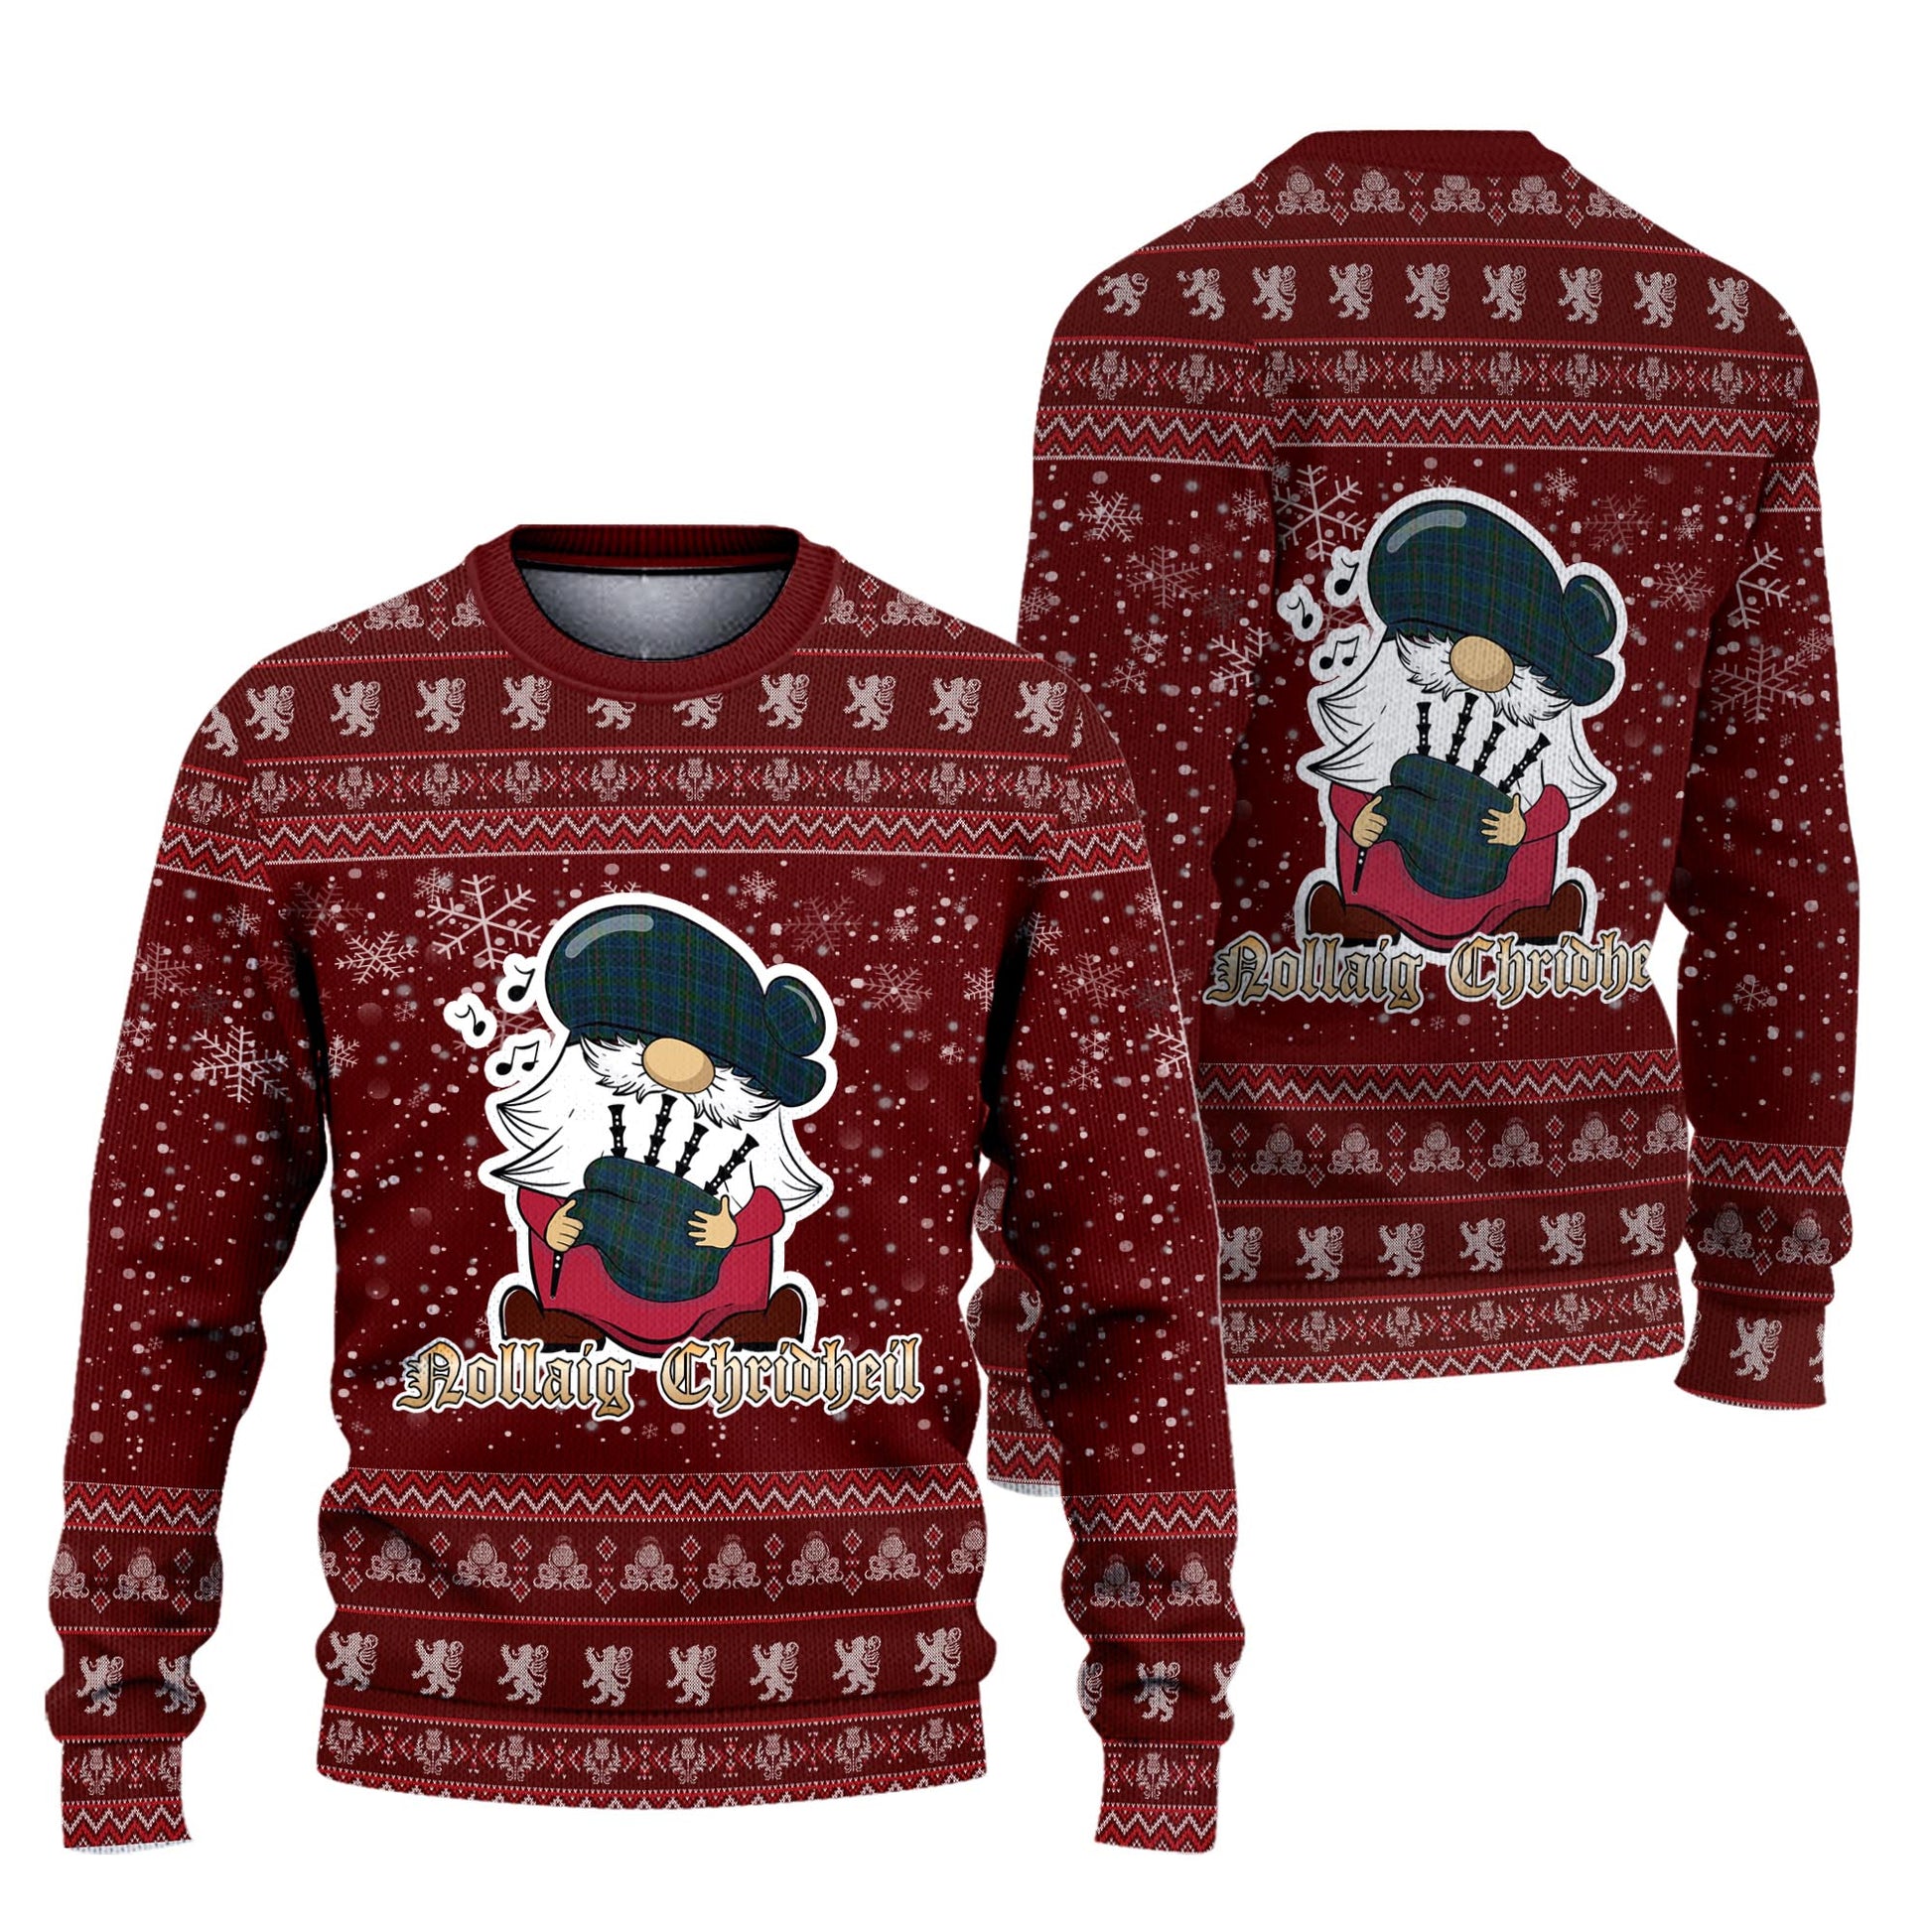 Richard of Wales Clan Christmas Family Knitted Sweater with Funny Gnome Playing Bagpipes Unisex Red - Tartanvibesclothing